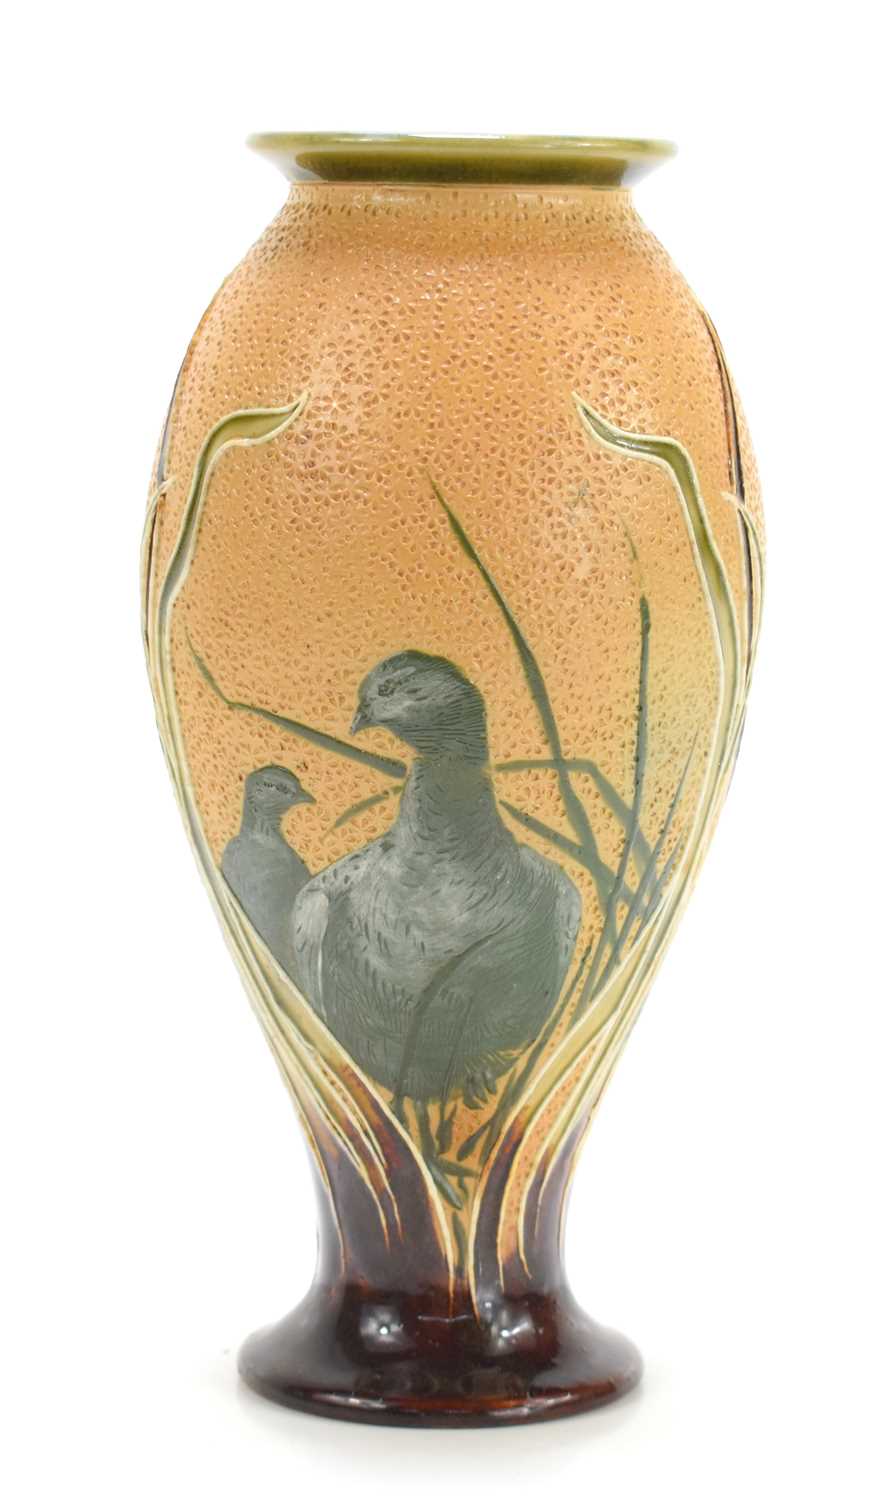 Florence E Barlow for Royal Doulton: A Pate-sur-pate stoneware vase, decorated with birds in